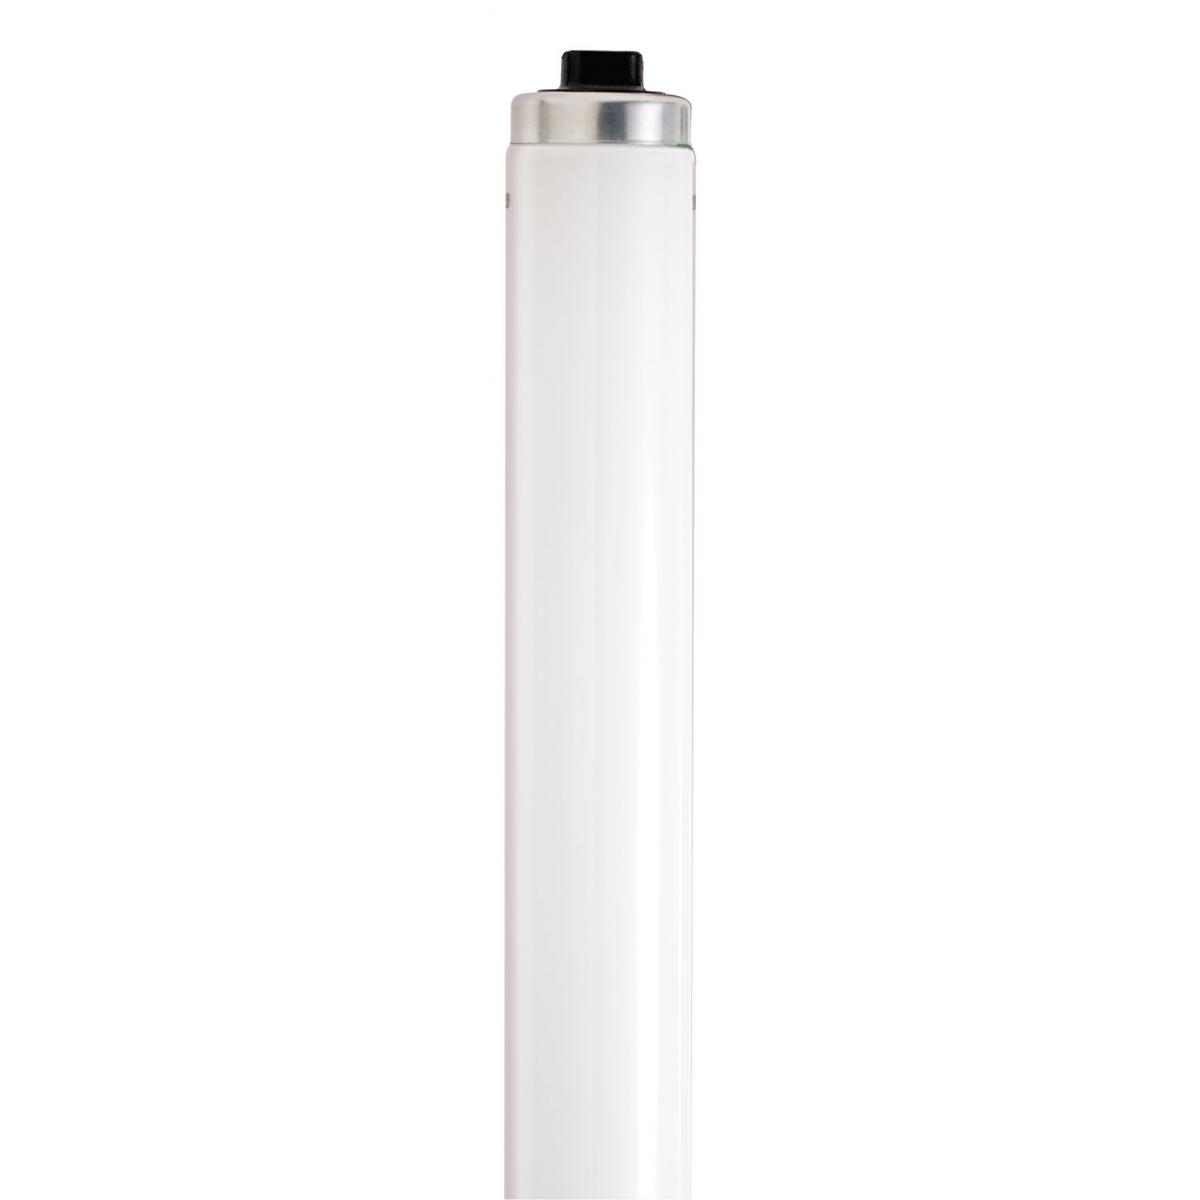 Recessed Double Contac F24T12/CW/HO 24" 35 Watts Linear Fluorescent Lamp T12 